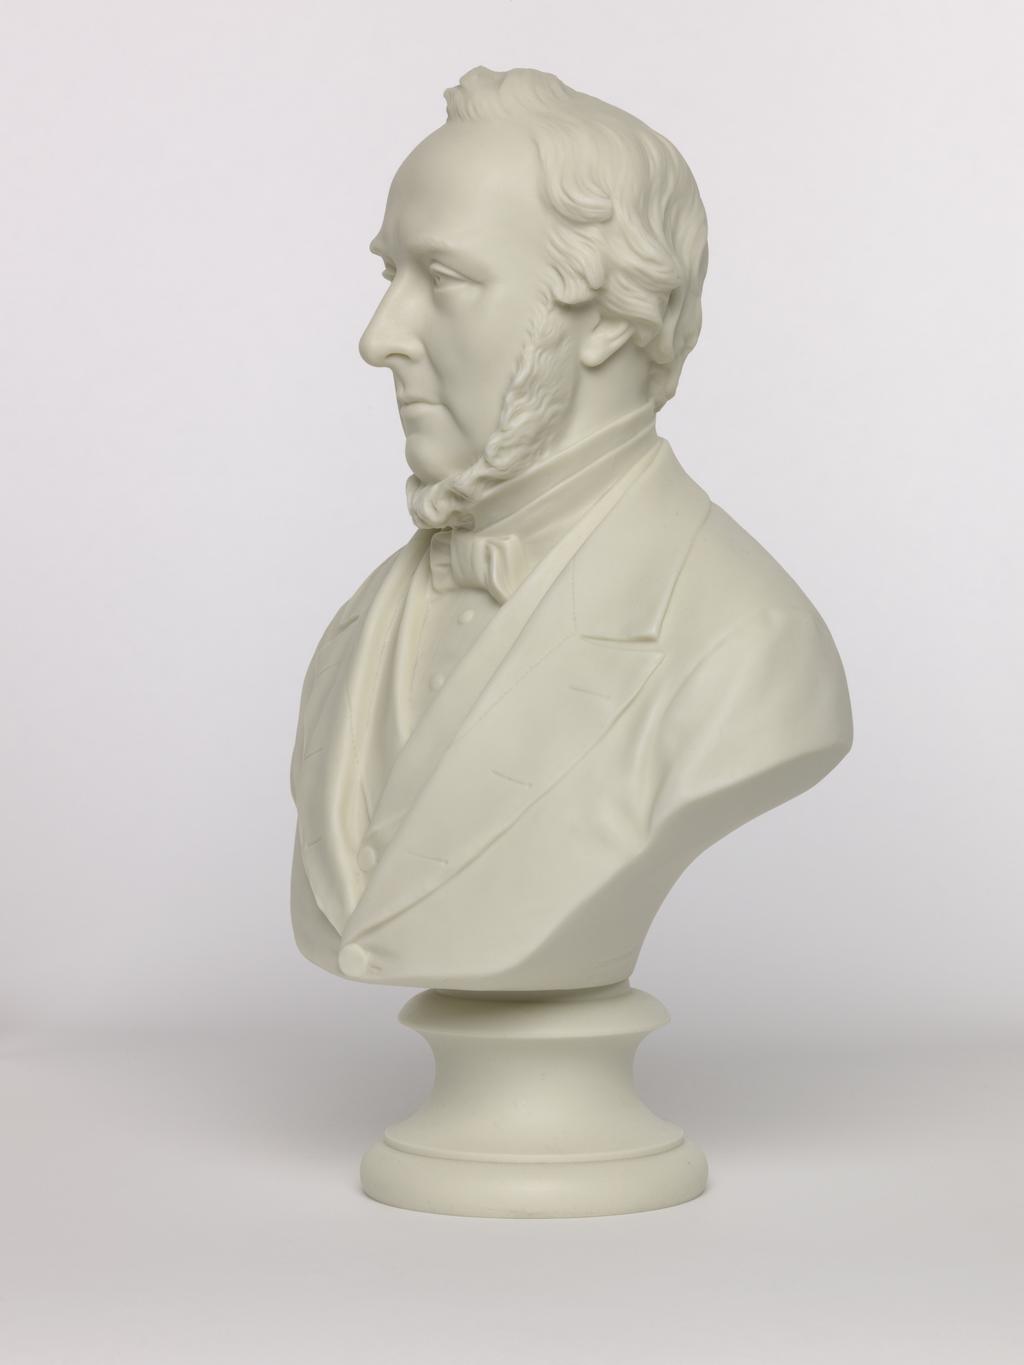 An image of Bust. Unknown man. Copeland, England, Staffordshire, Stoke-on-Trent. Inscription: maker's name; reverse of bust; marked; COPYRIGHT RESERVED COPELAND L 76. Parian (porcelain), slip-cast, height, 32.2 cm, length, 20.5 cm, width, 12 cm, length, base, 9.8 cm. Acquisition Credit: Accepted by H. M. Government in lieu of Inheritance Tax from the estate of G. D. V. Glynn, and allocated to the Fitzwilliam Museum.